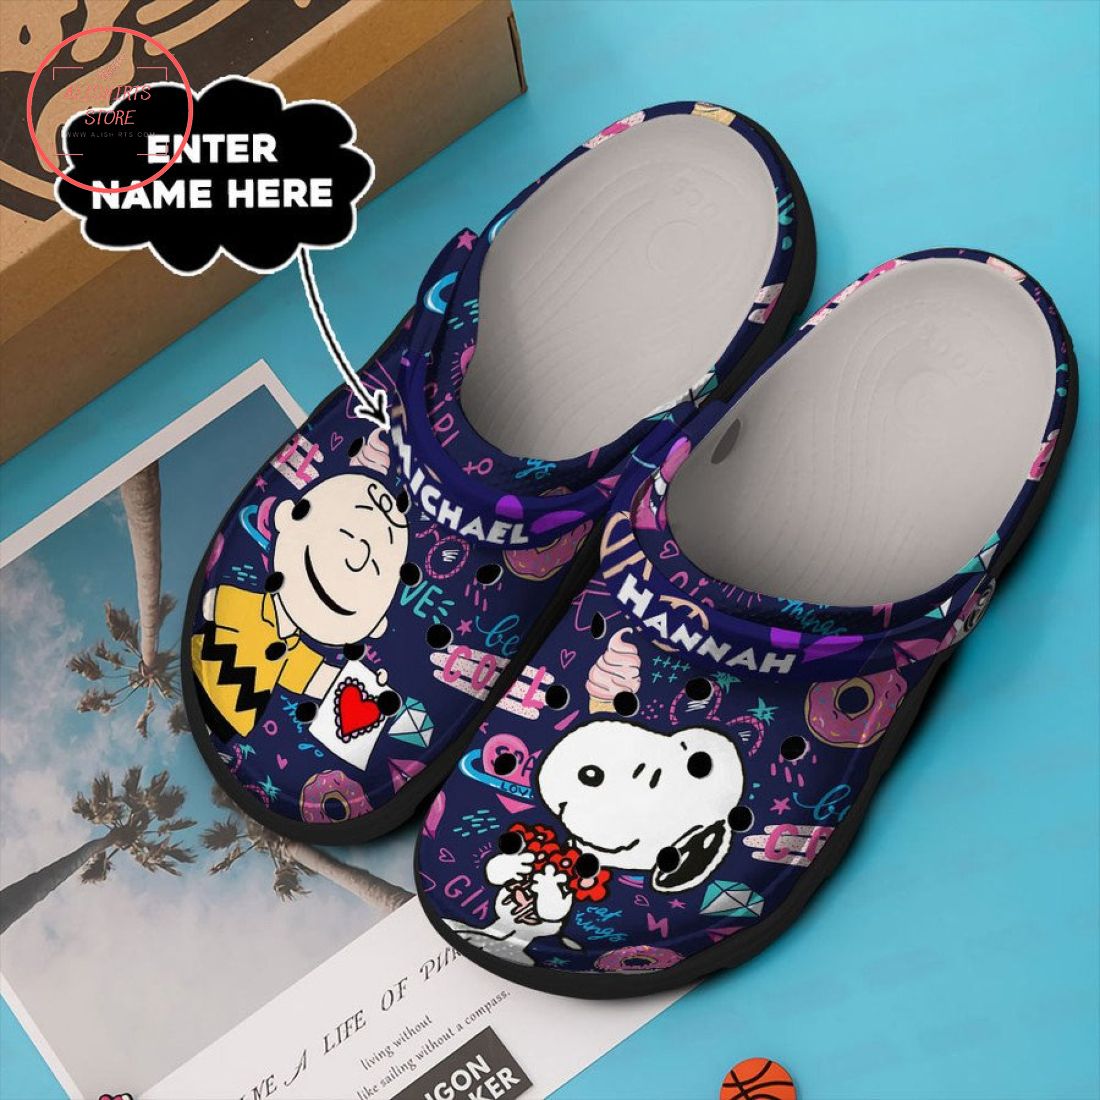 Personalized Snoopy Charlie Brown Crocs Crocband Clog